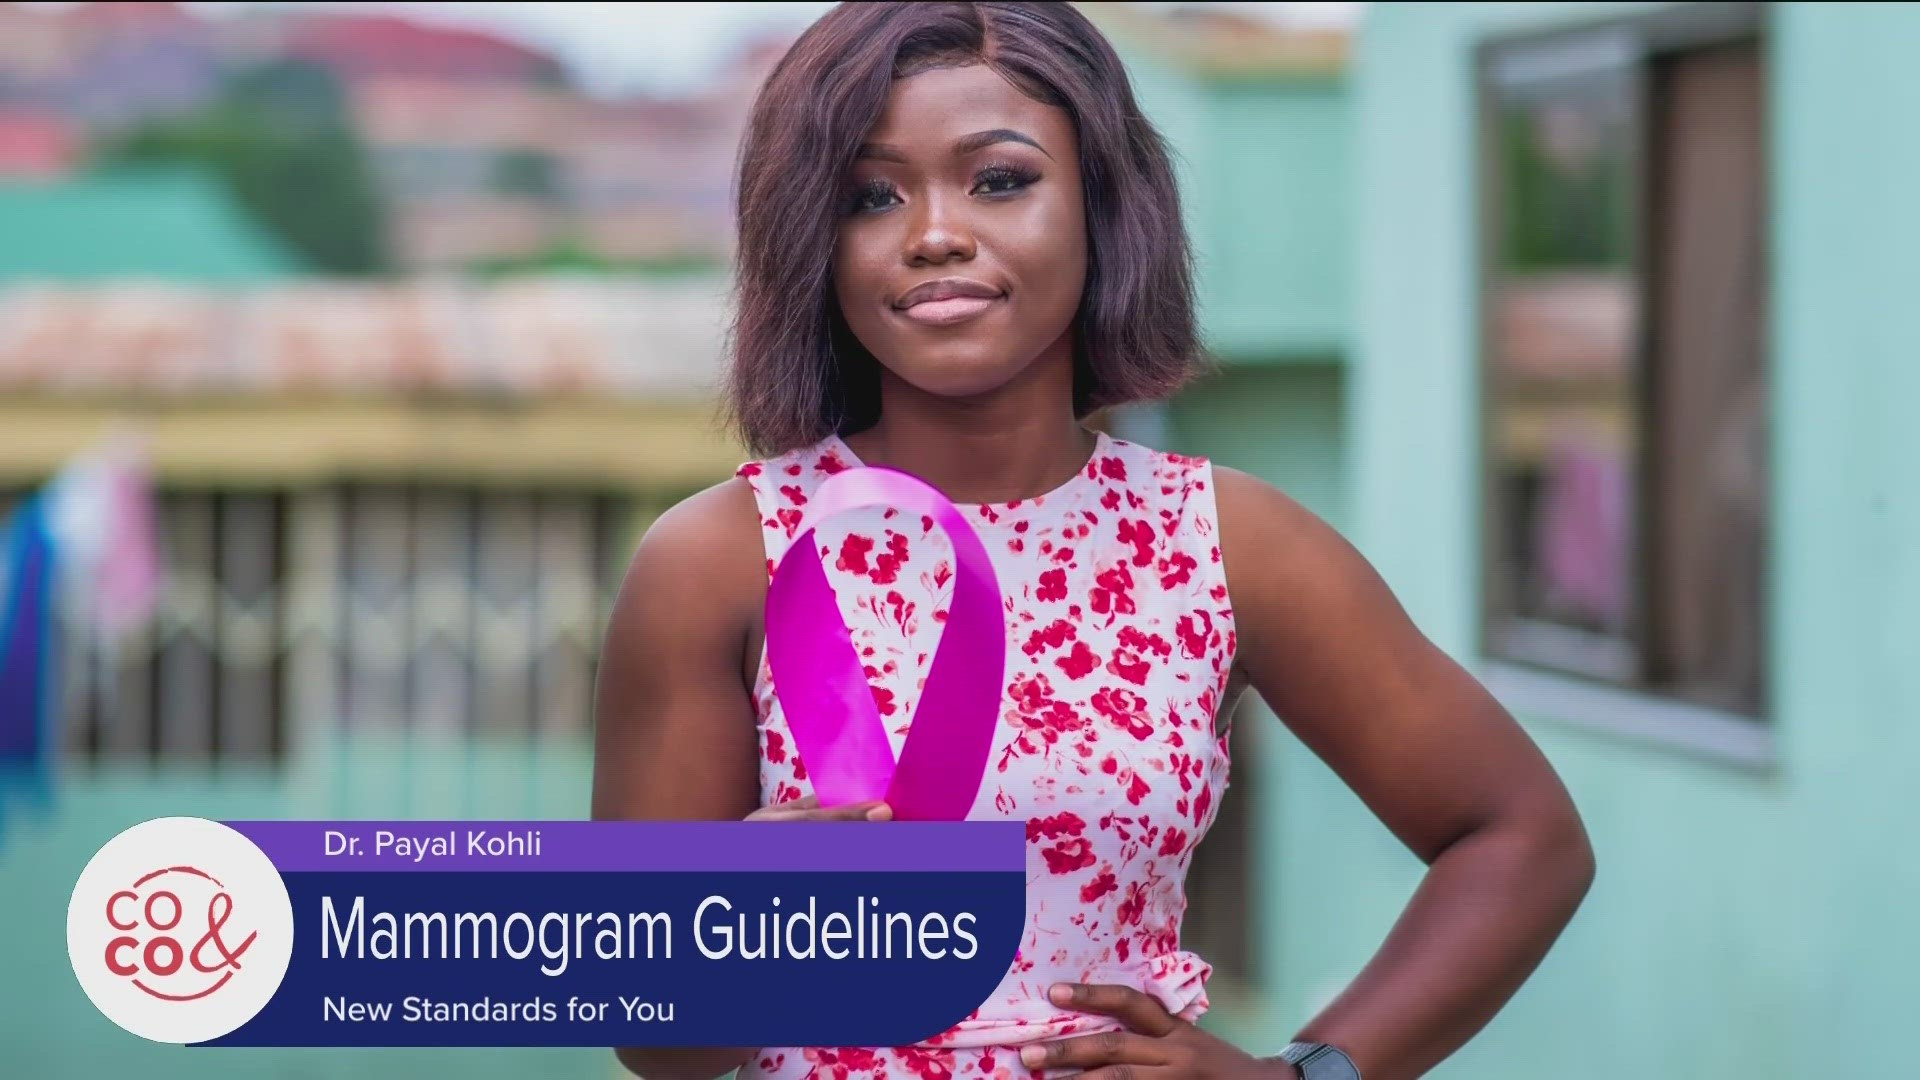 For more on these new guidelines, head to BreastCancer.org.